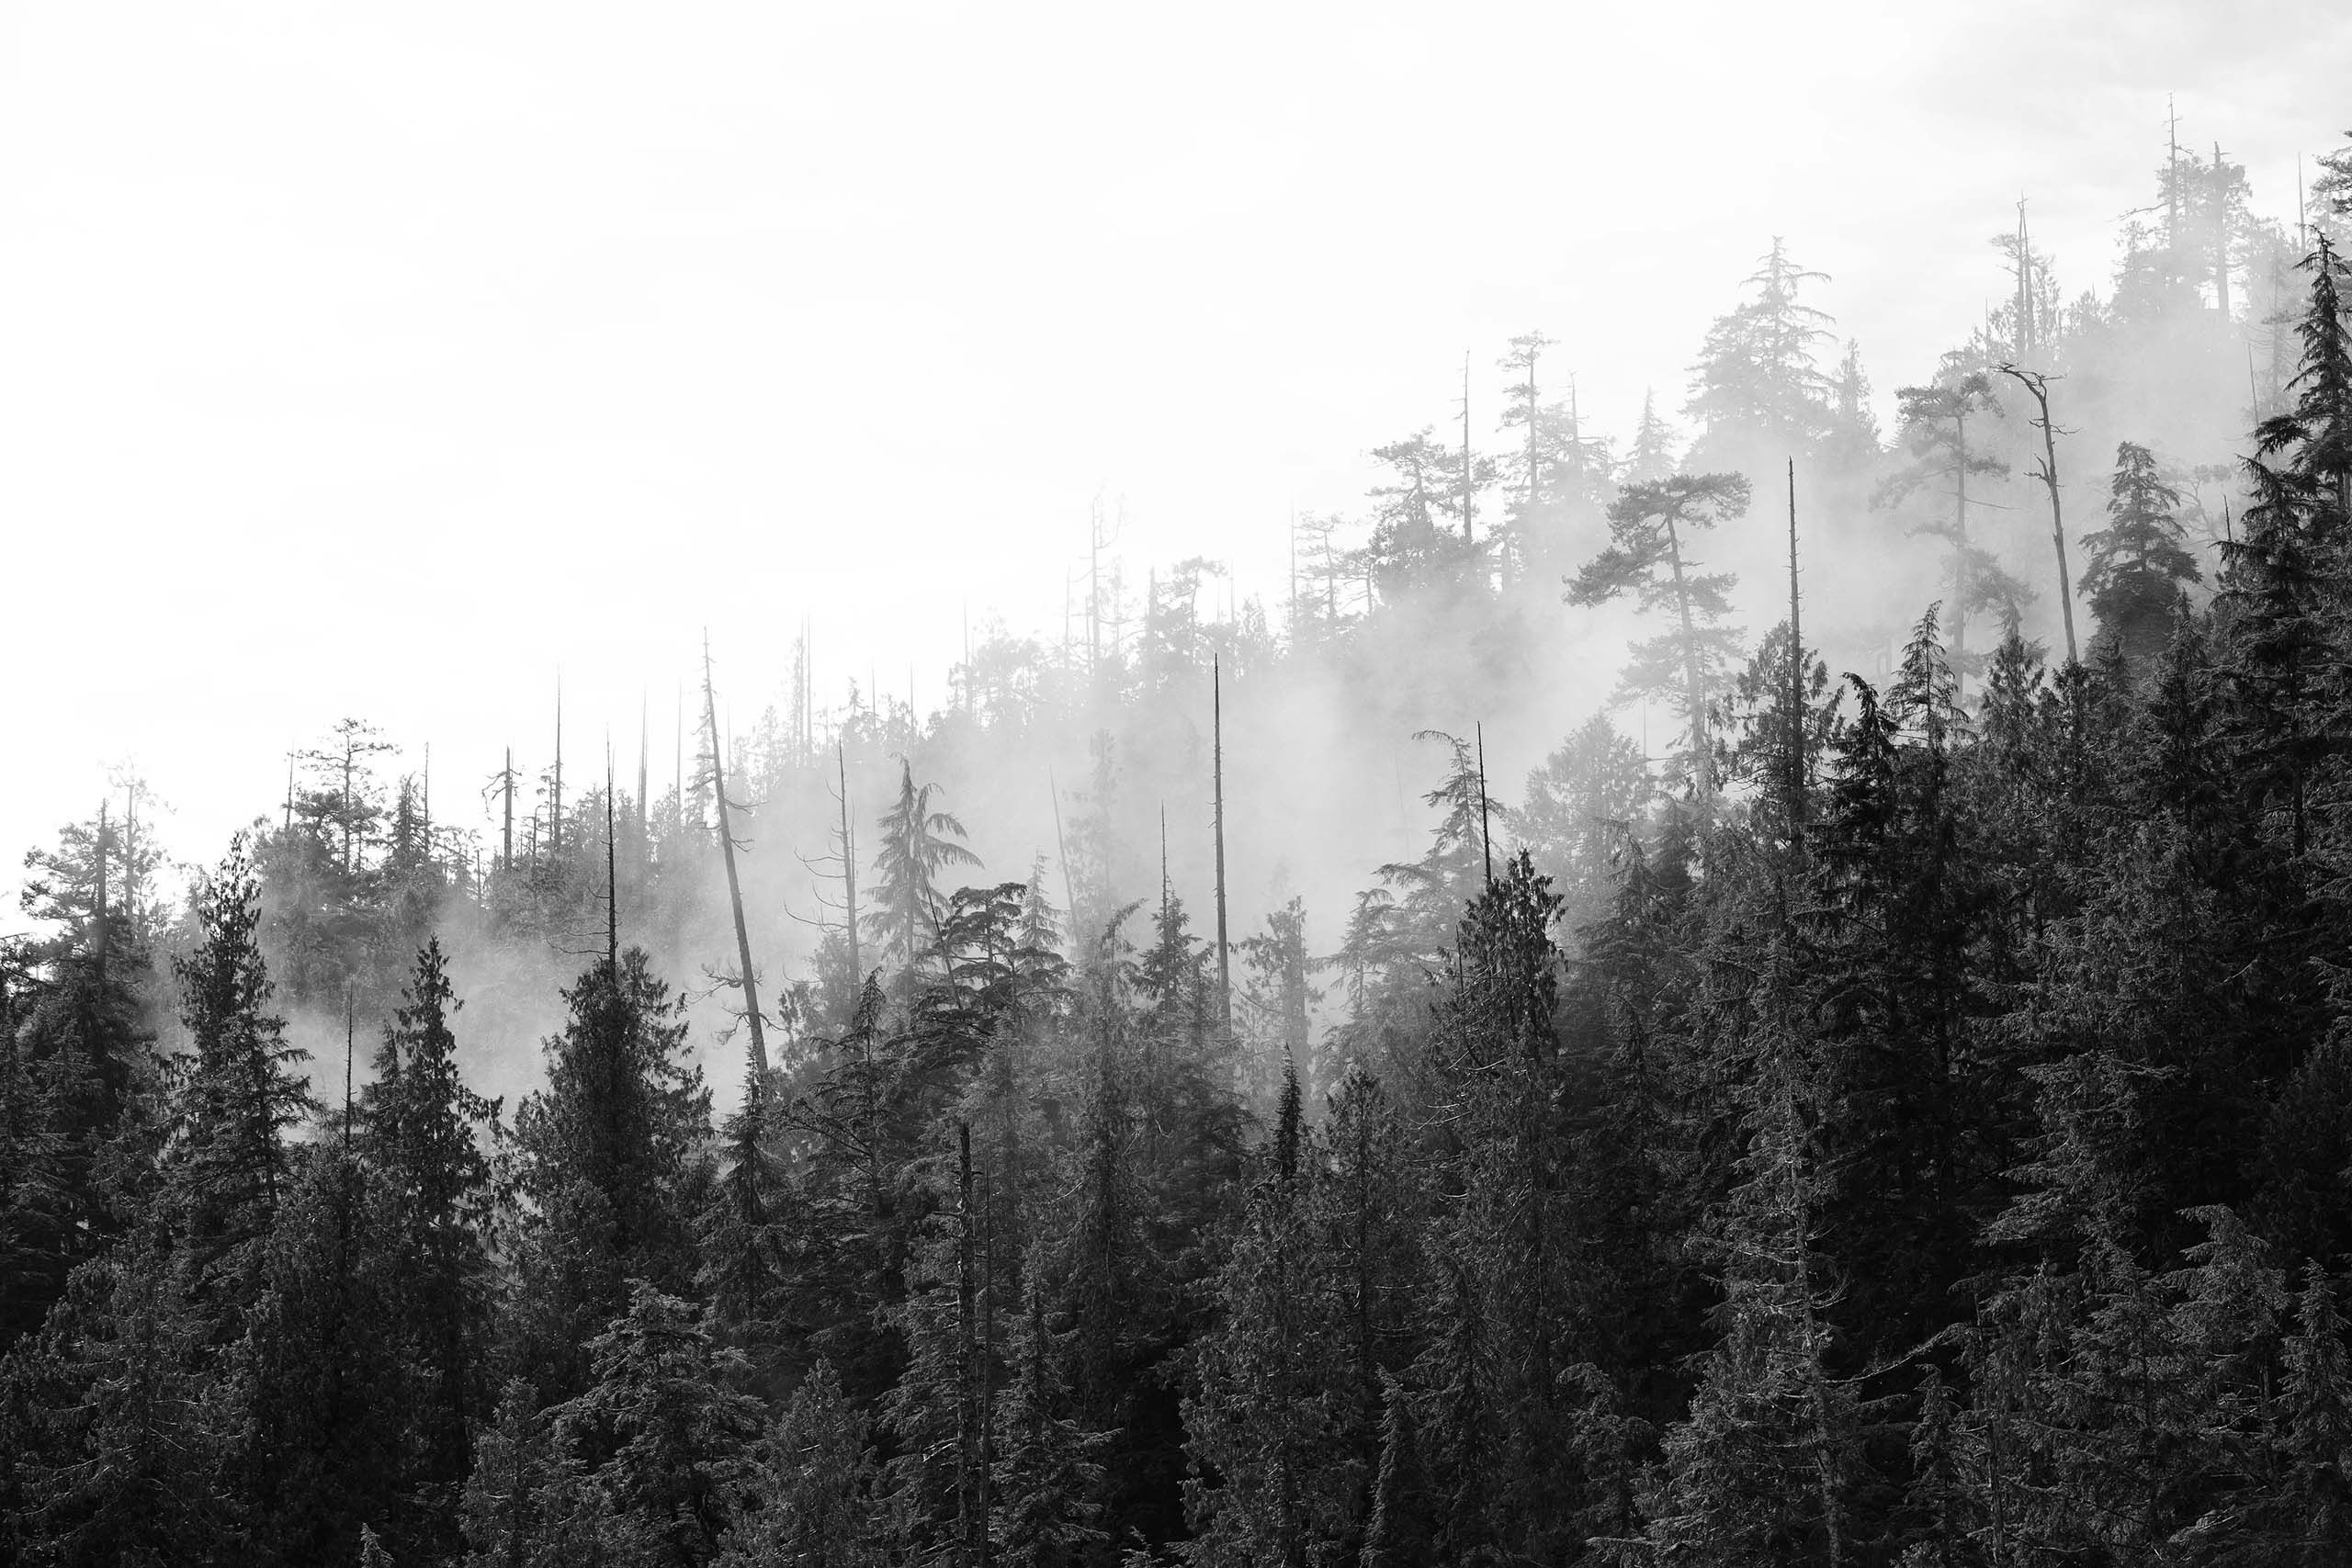 Clayoquot forest with trees and mist